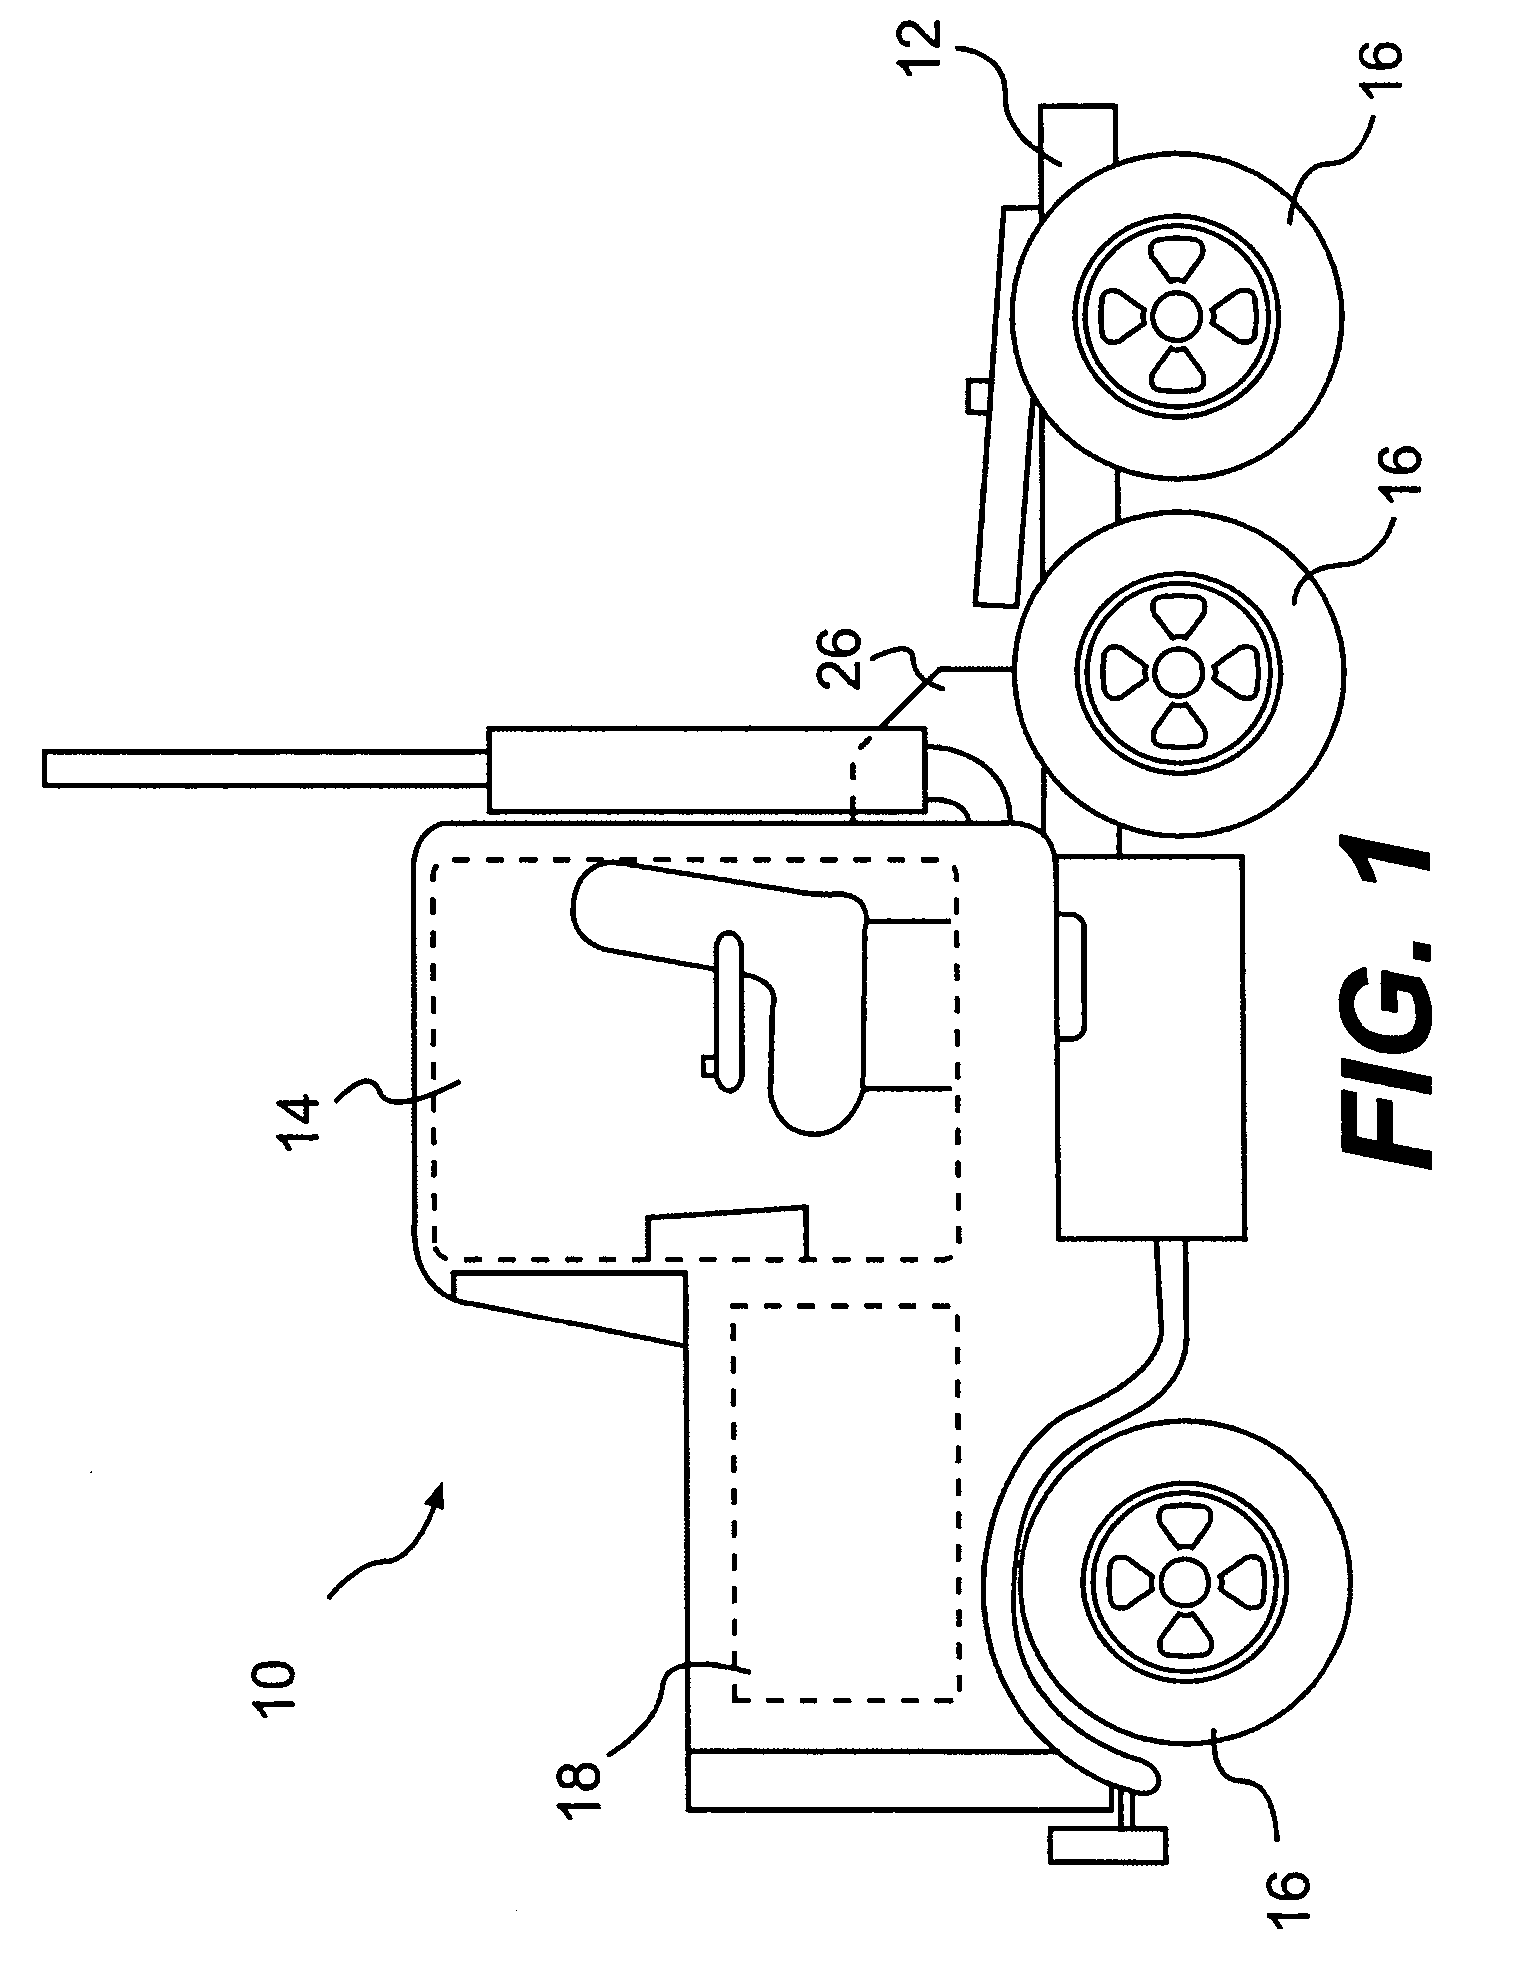 Automatic start-up of an auxiliary power unit